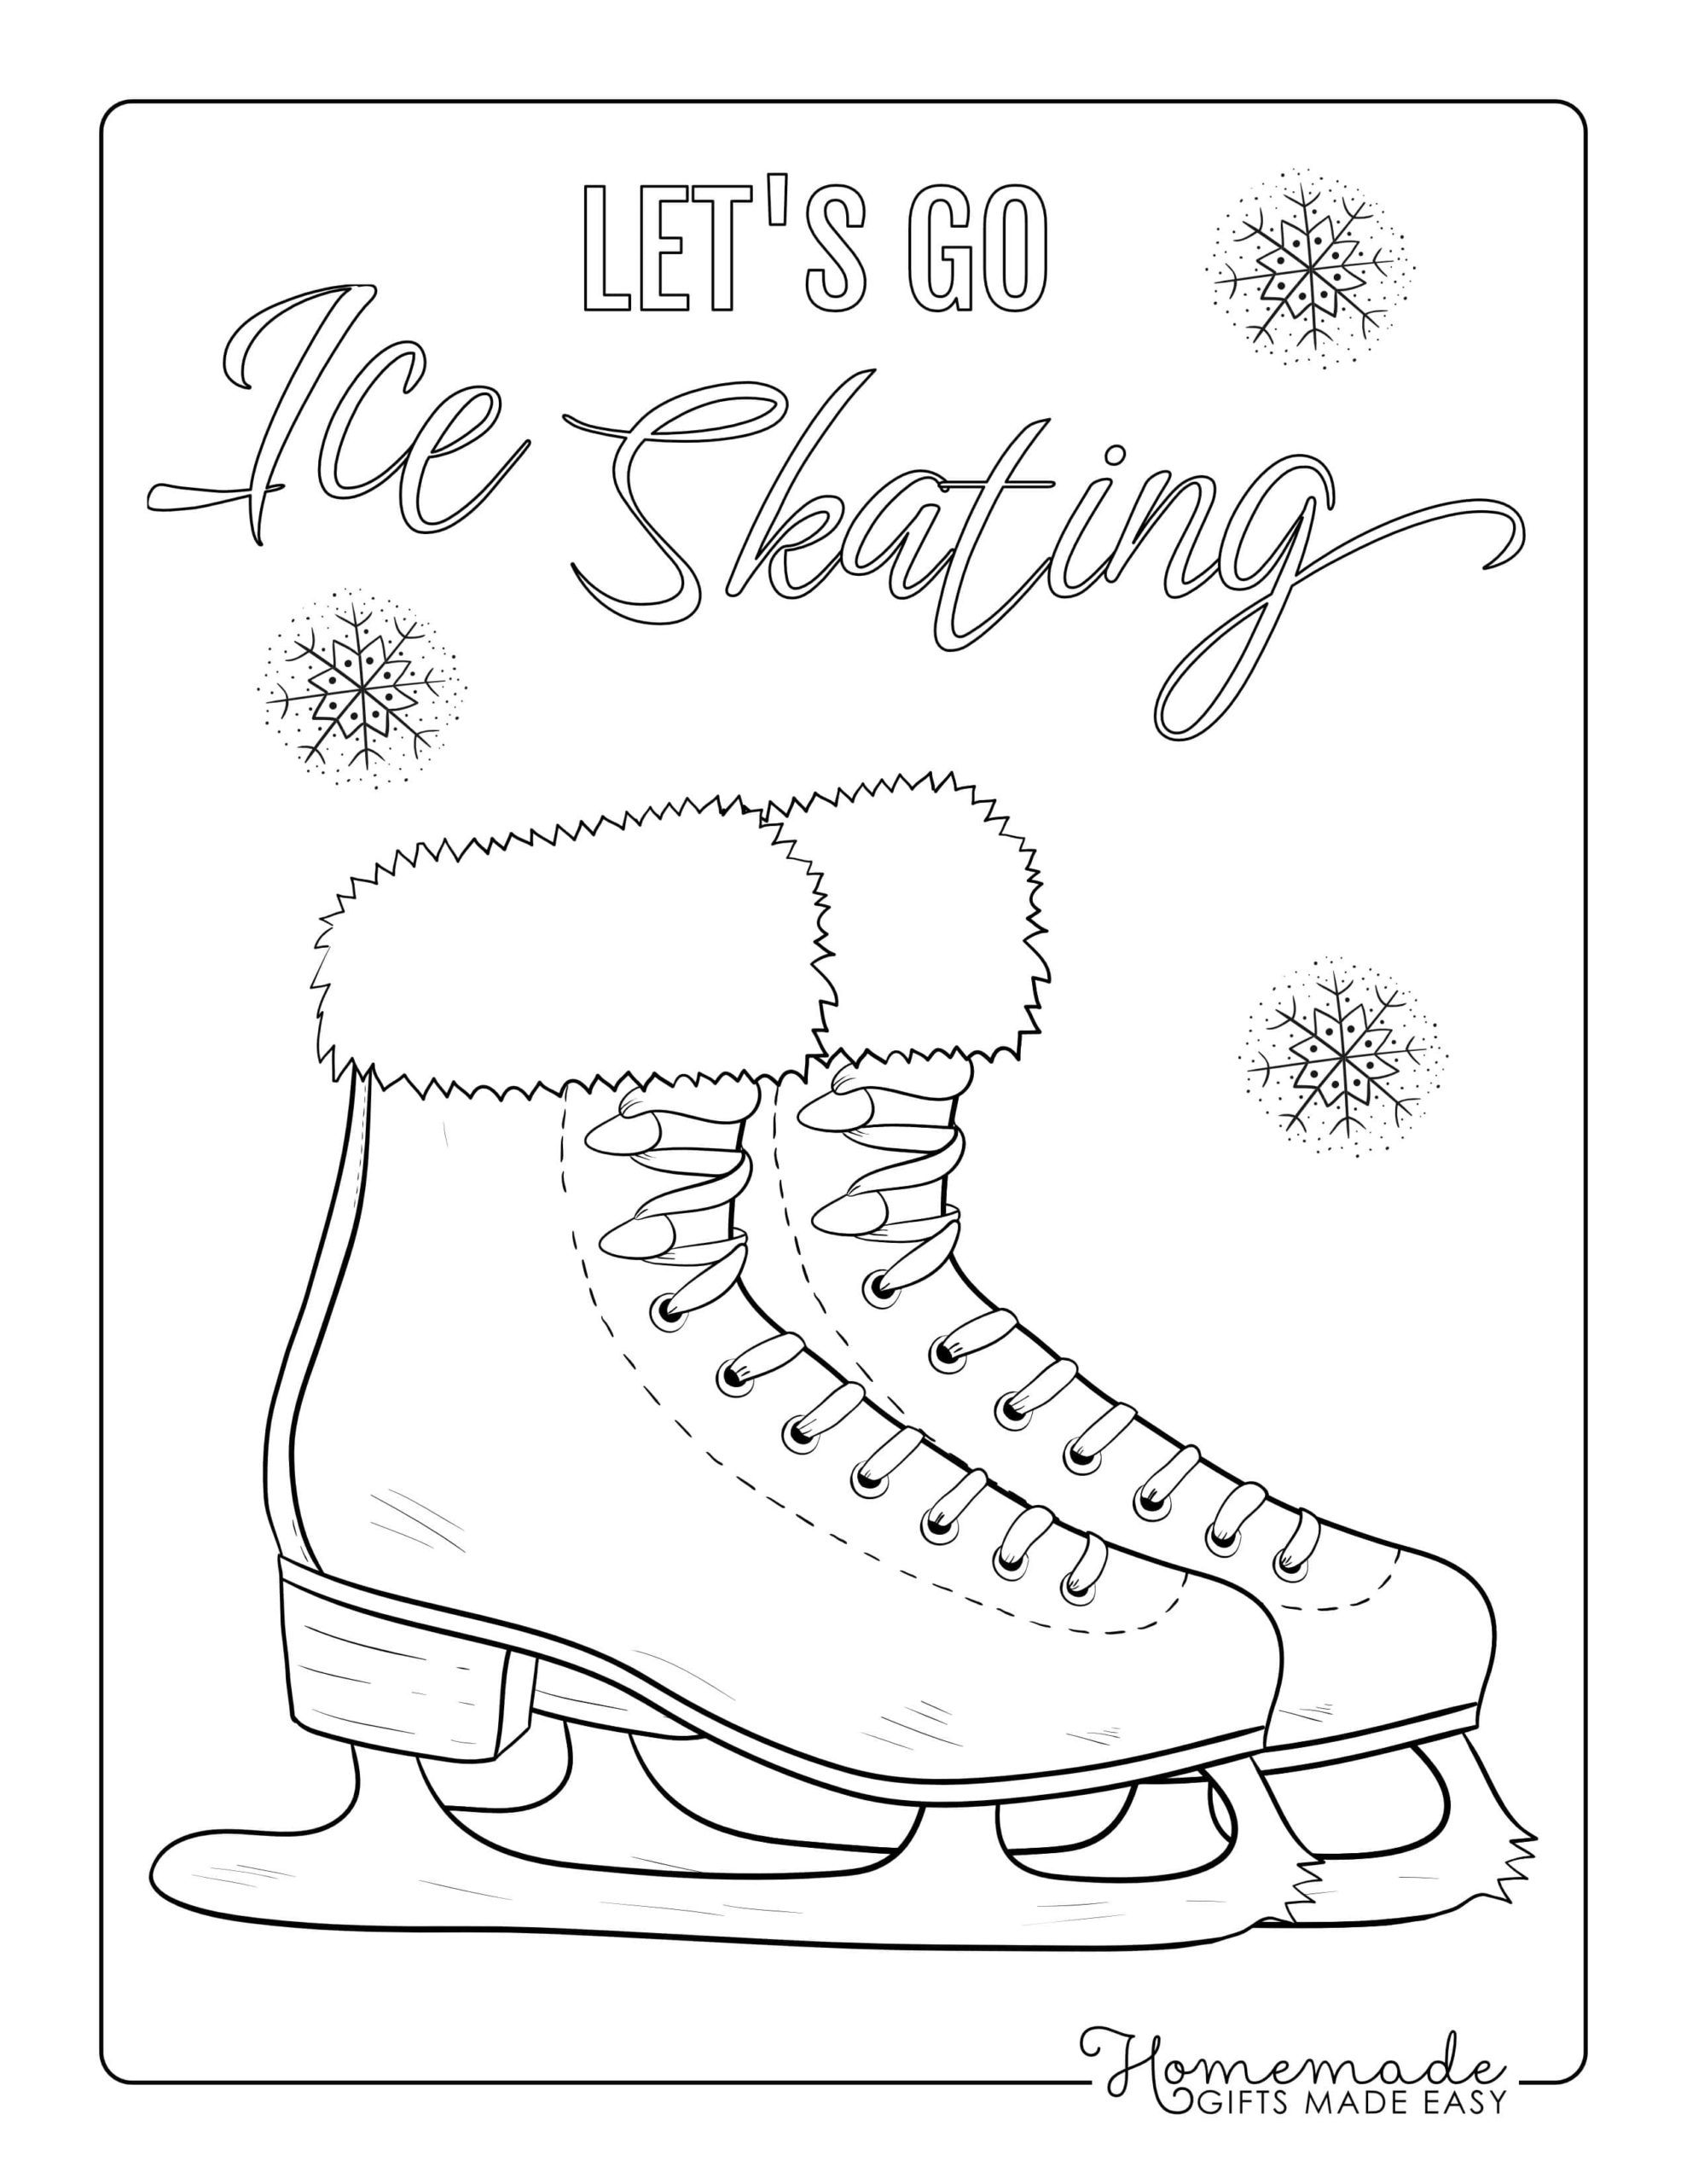 free winter coloring pages for adults | large winter coloring pages for adults | pretty winter coloring pages for adults